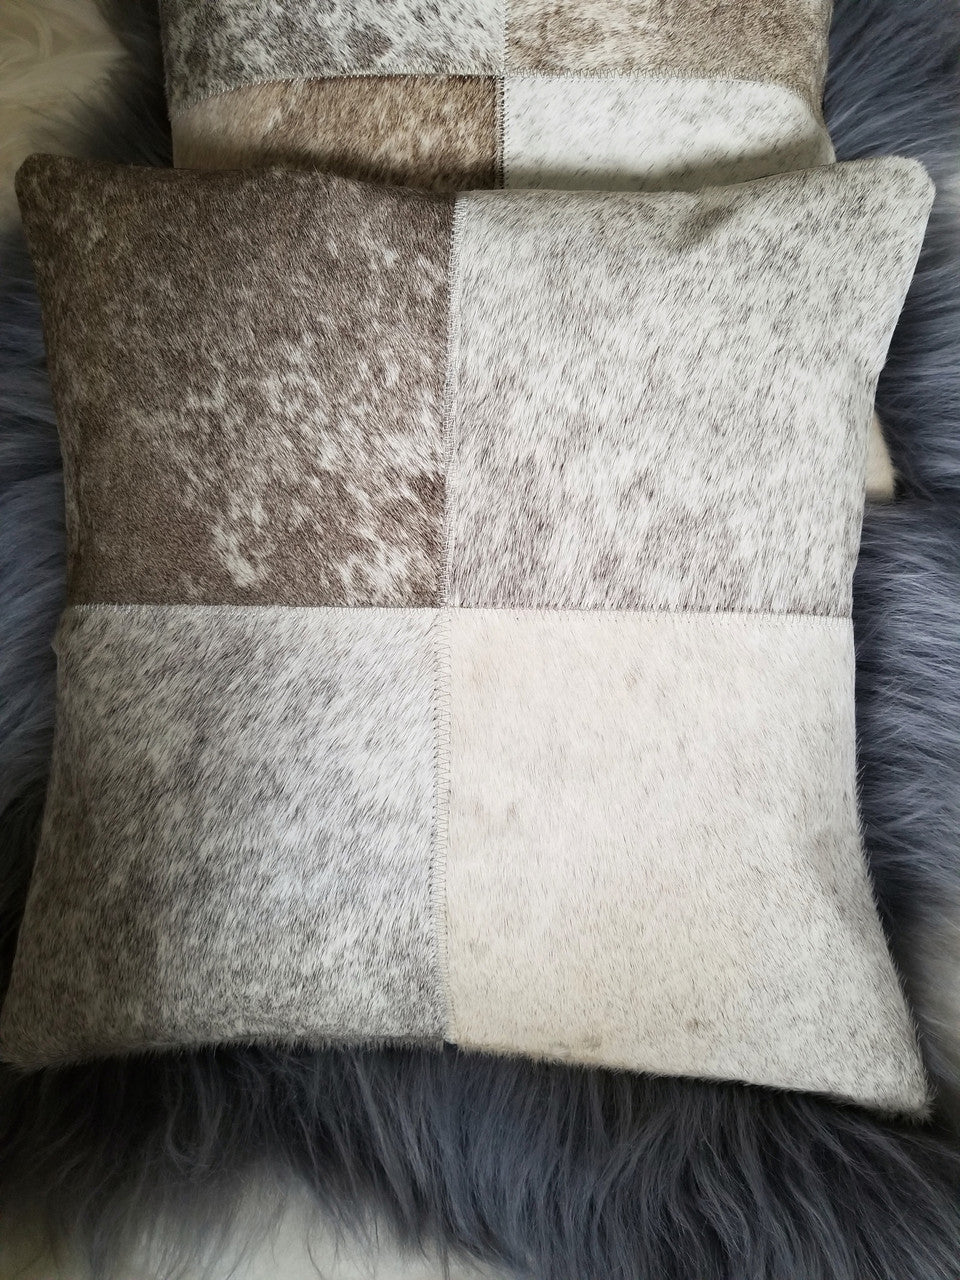 Cowhide Cushion Cover Patchwork Grey White Pillow Covers 16 by 16 inches